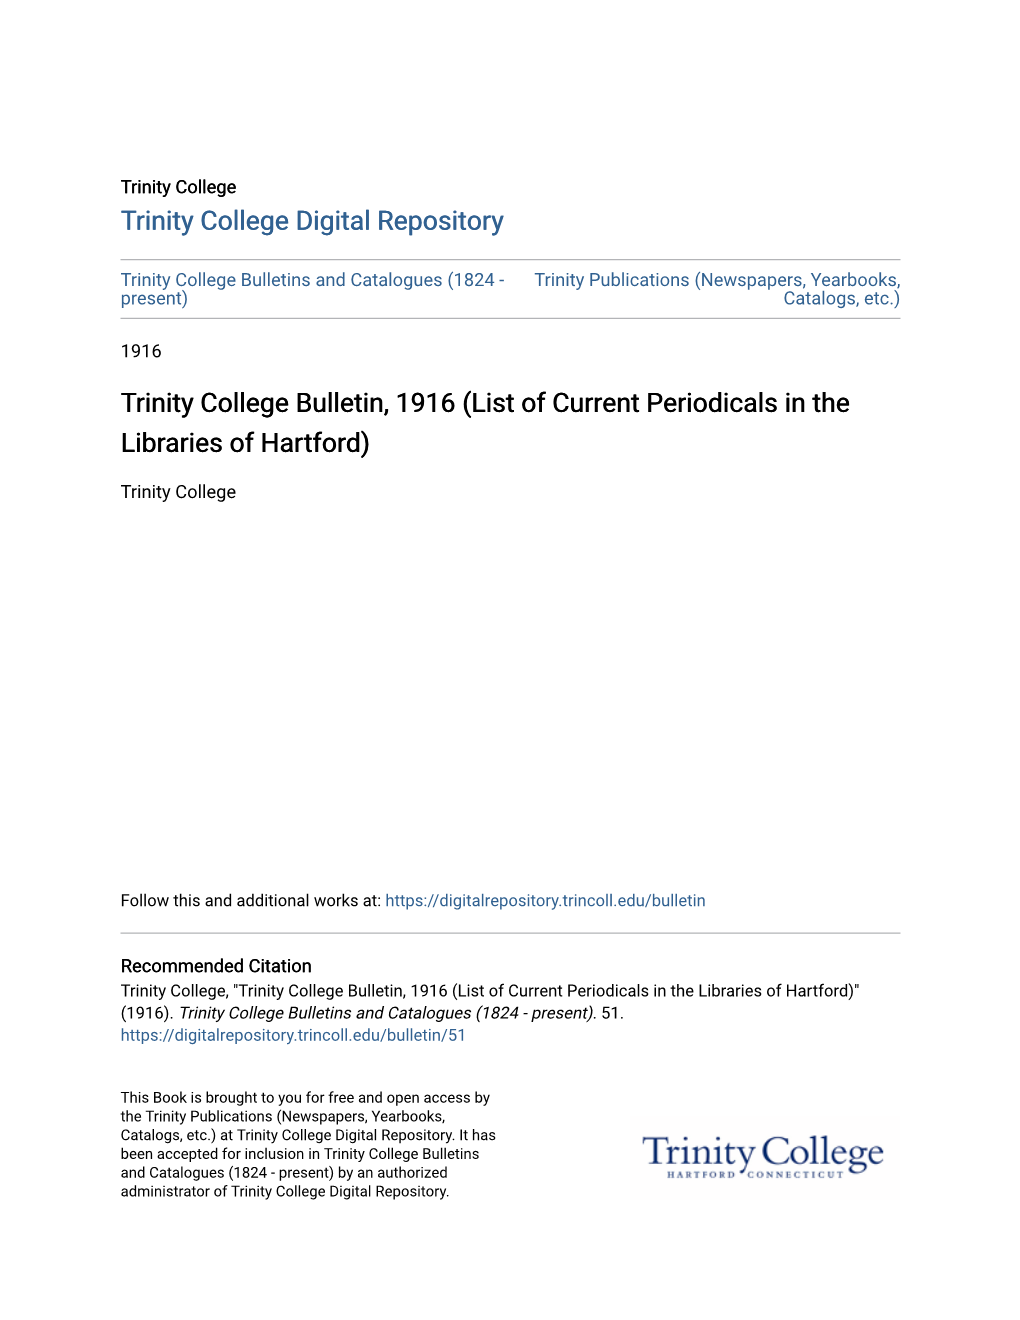 Trinity College Bulletin, 1916 (List of Current Periodicals in the Libraries of Hartford)